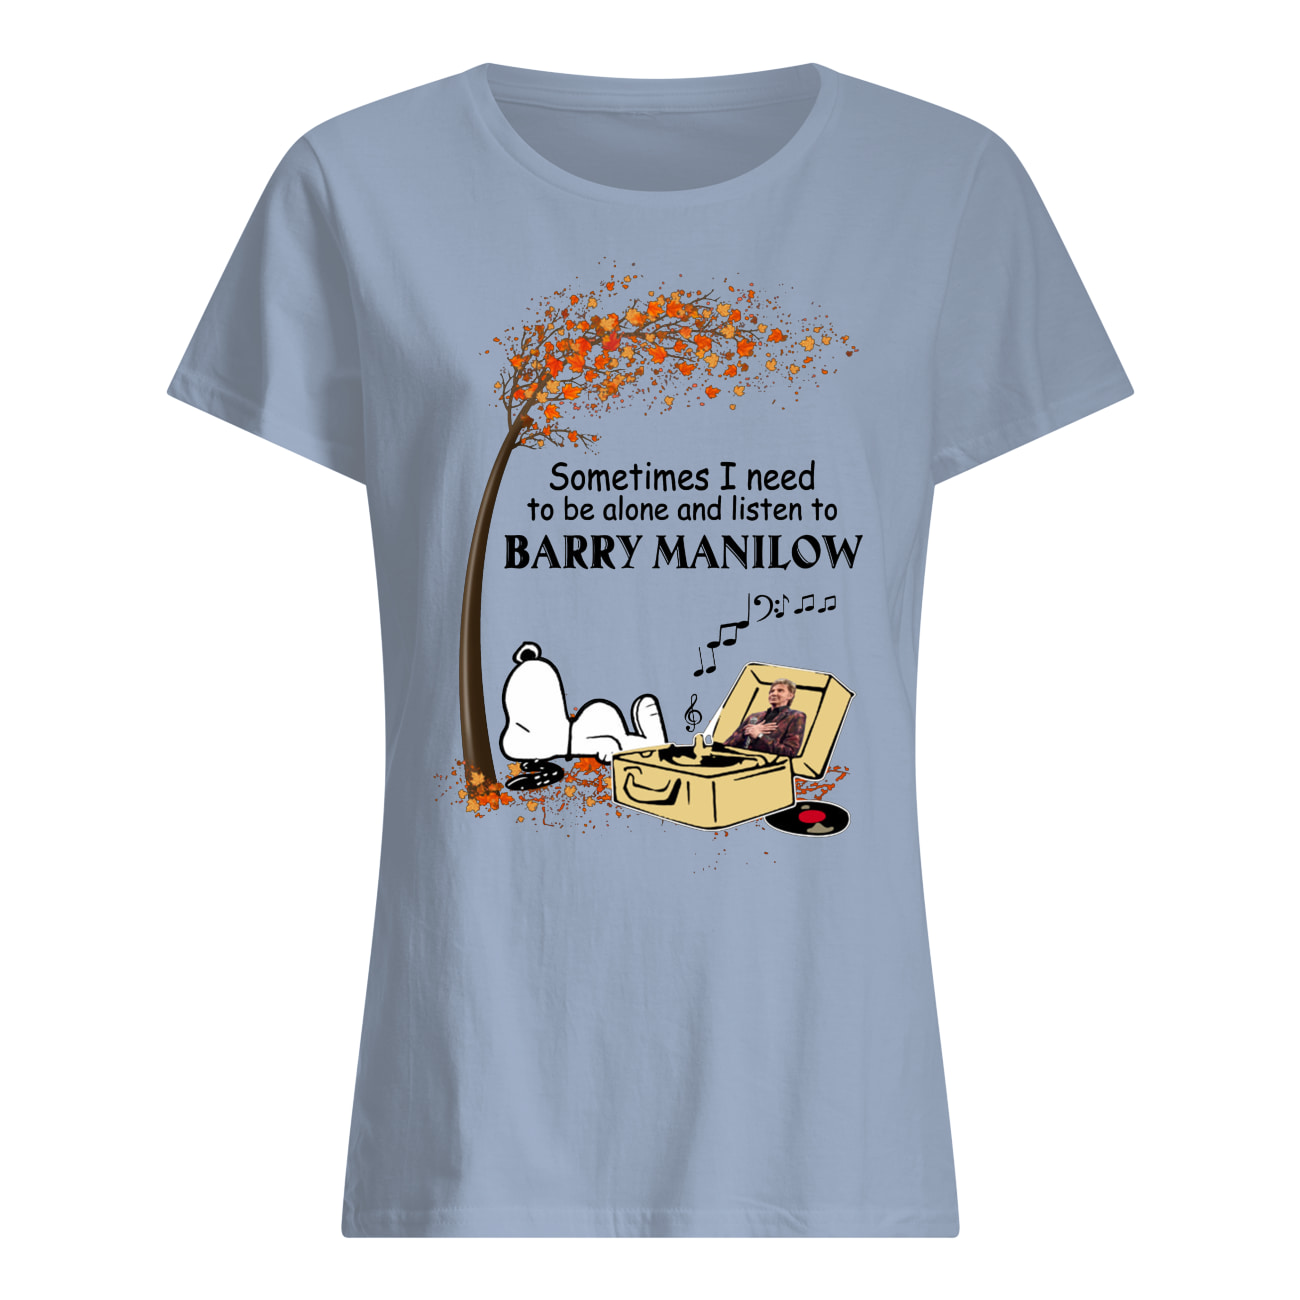 Snoopy sometimes I need to be alone and listen to barry manilow women's shirt